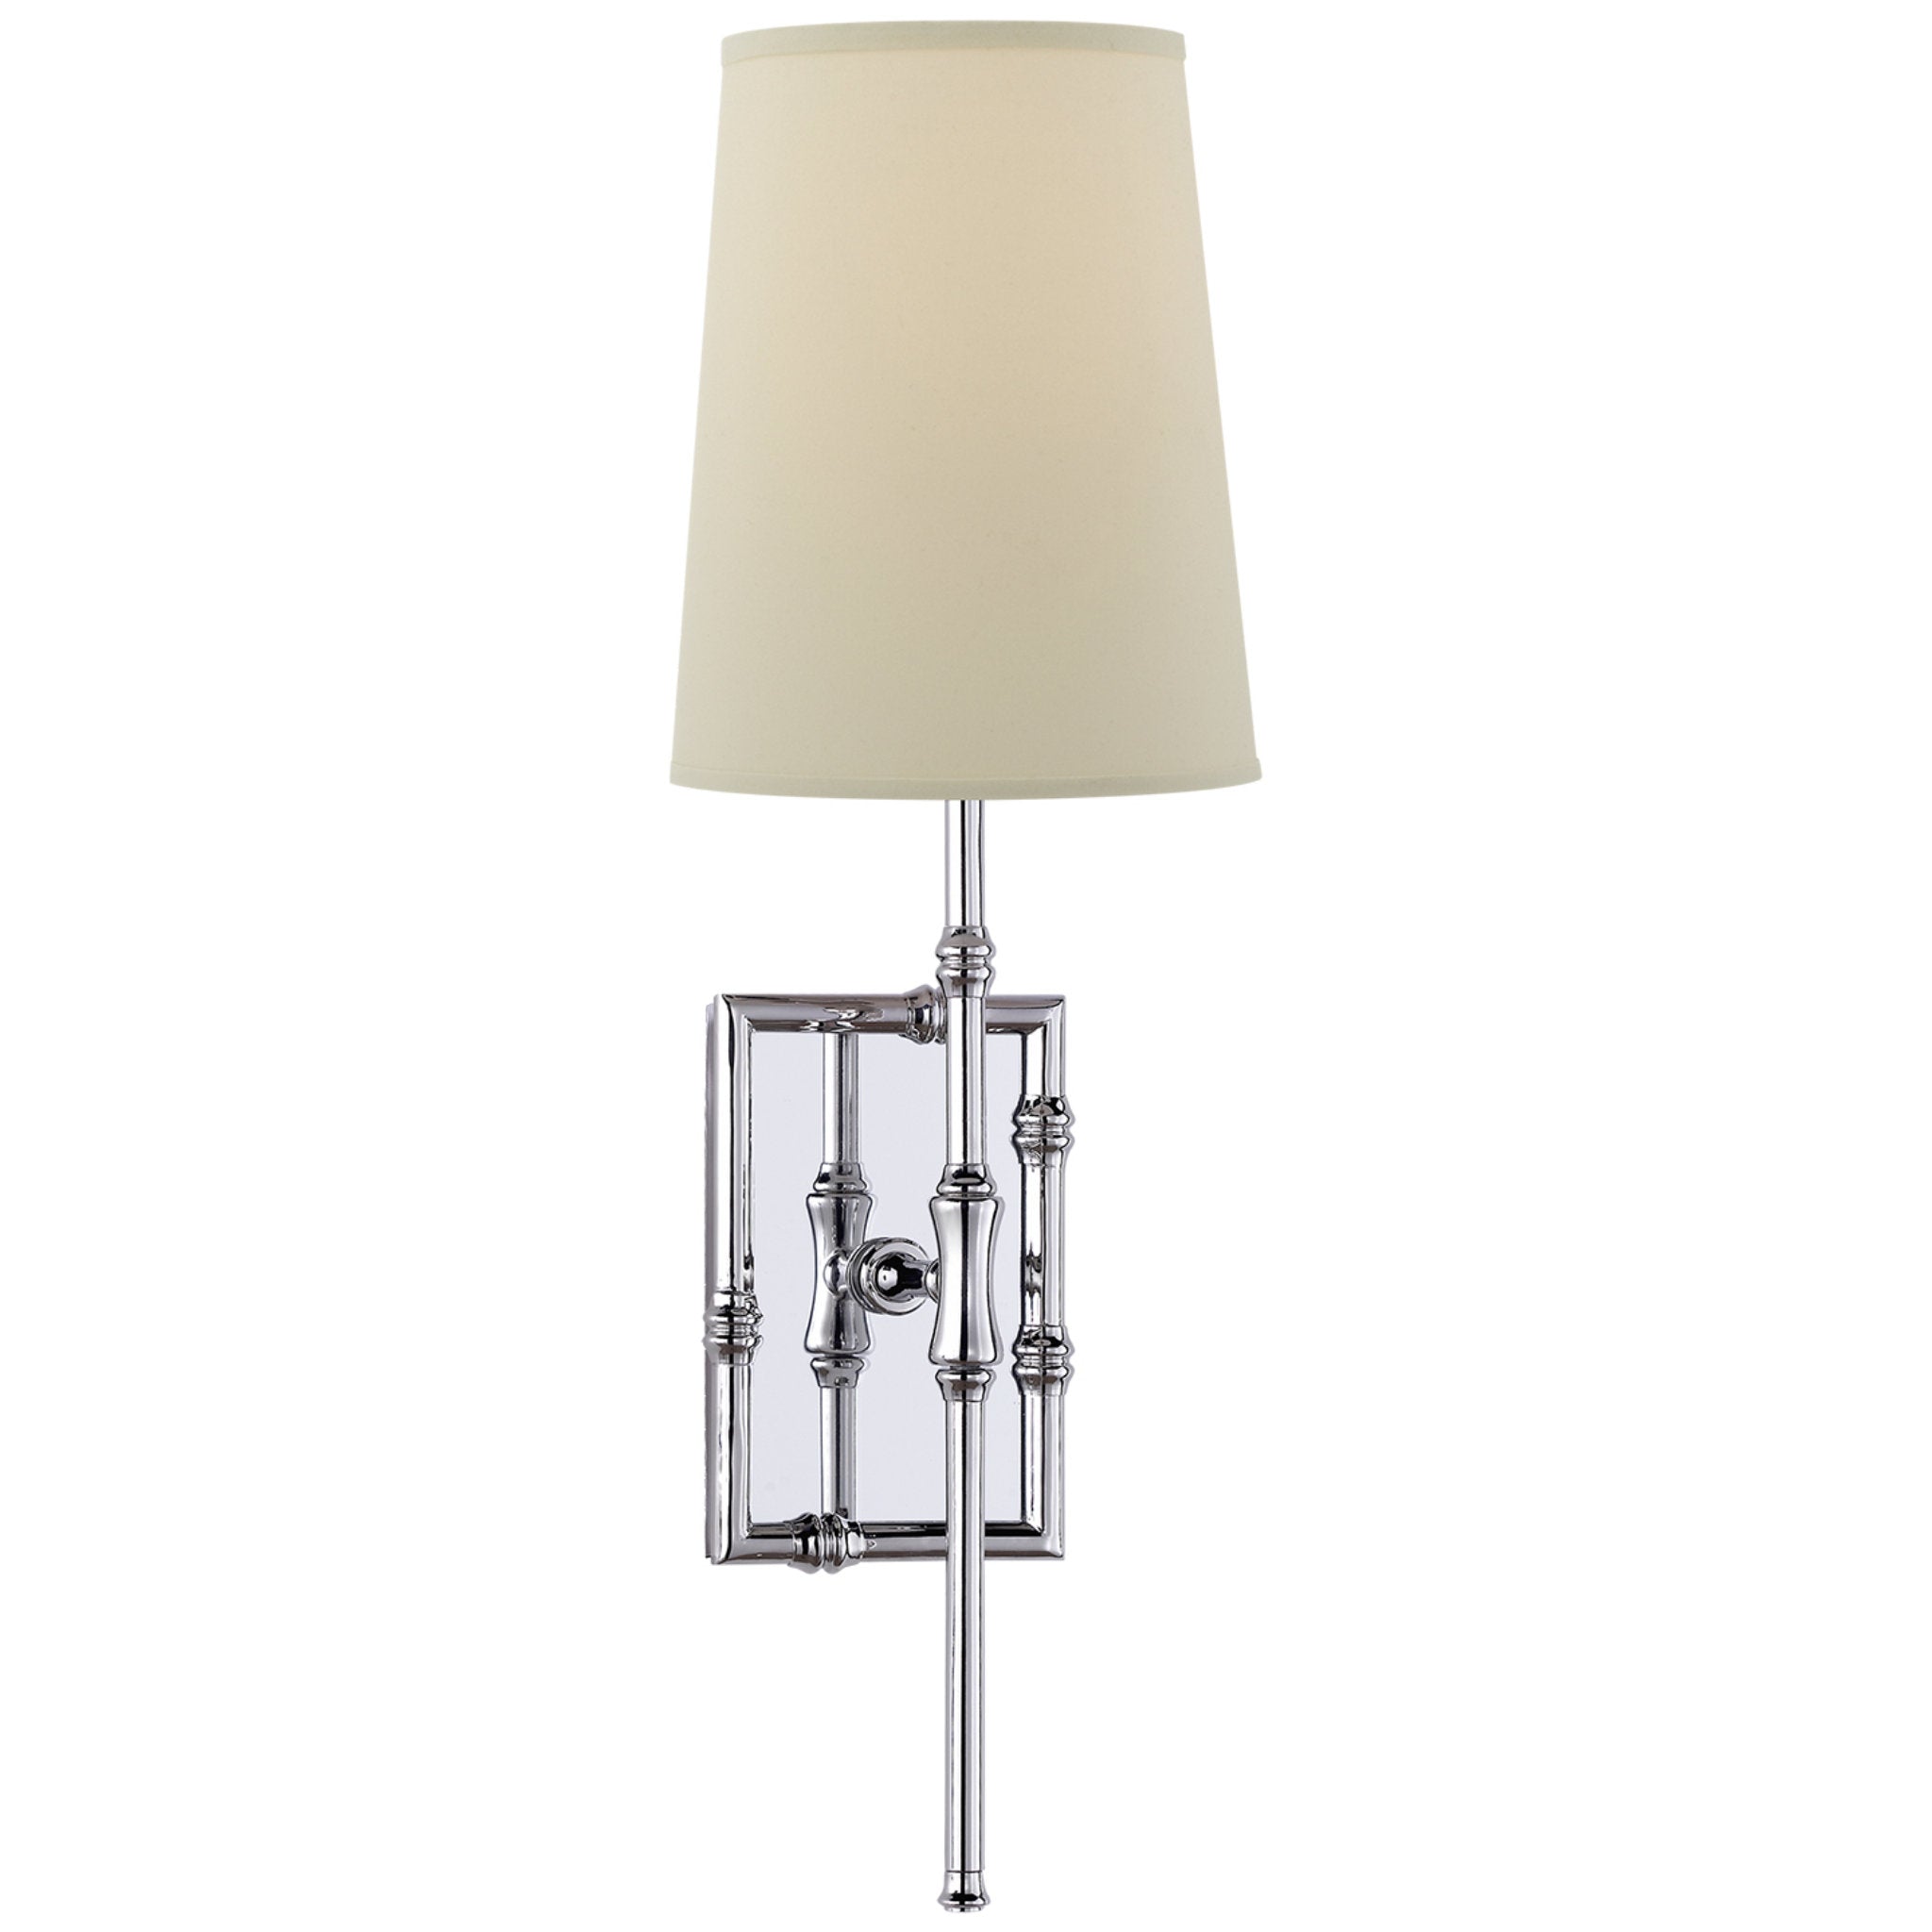 Visual Comfort Grenol Single Modern Bamboo Sconce in Polished Nickel with Natural Percale Shade